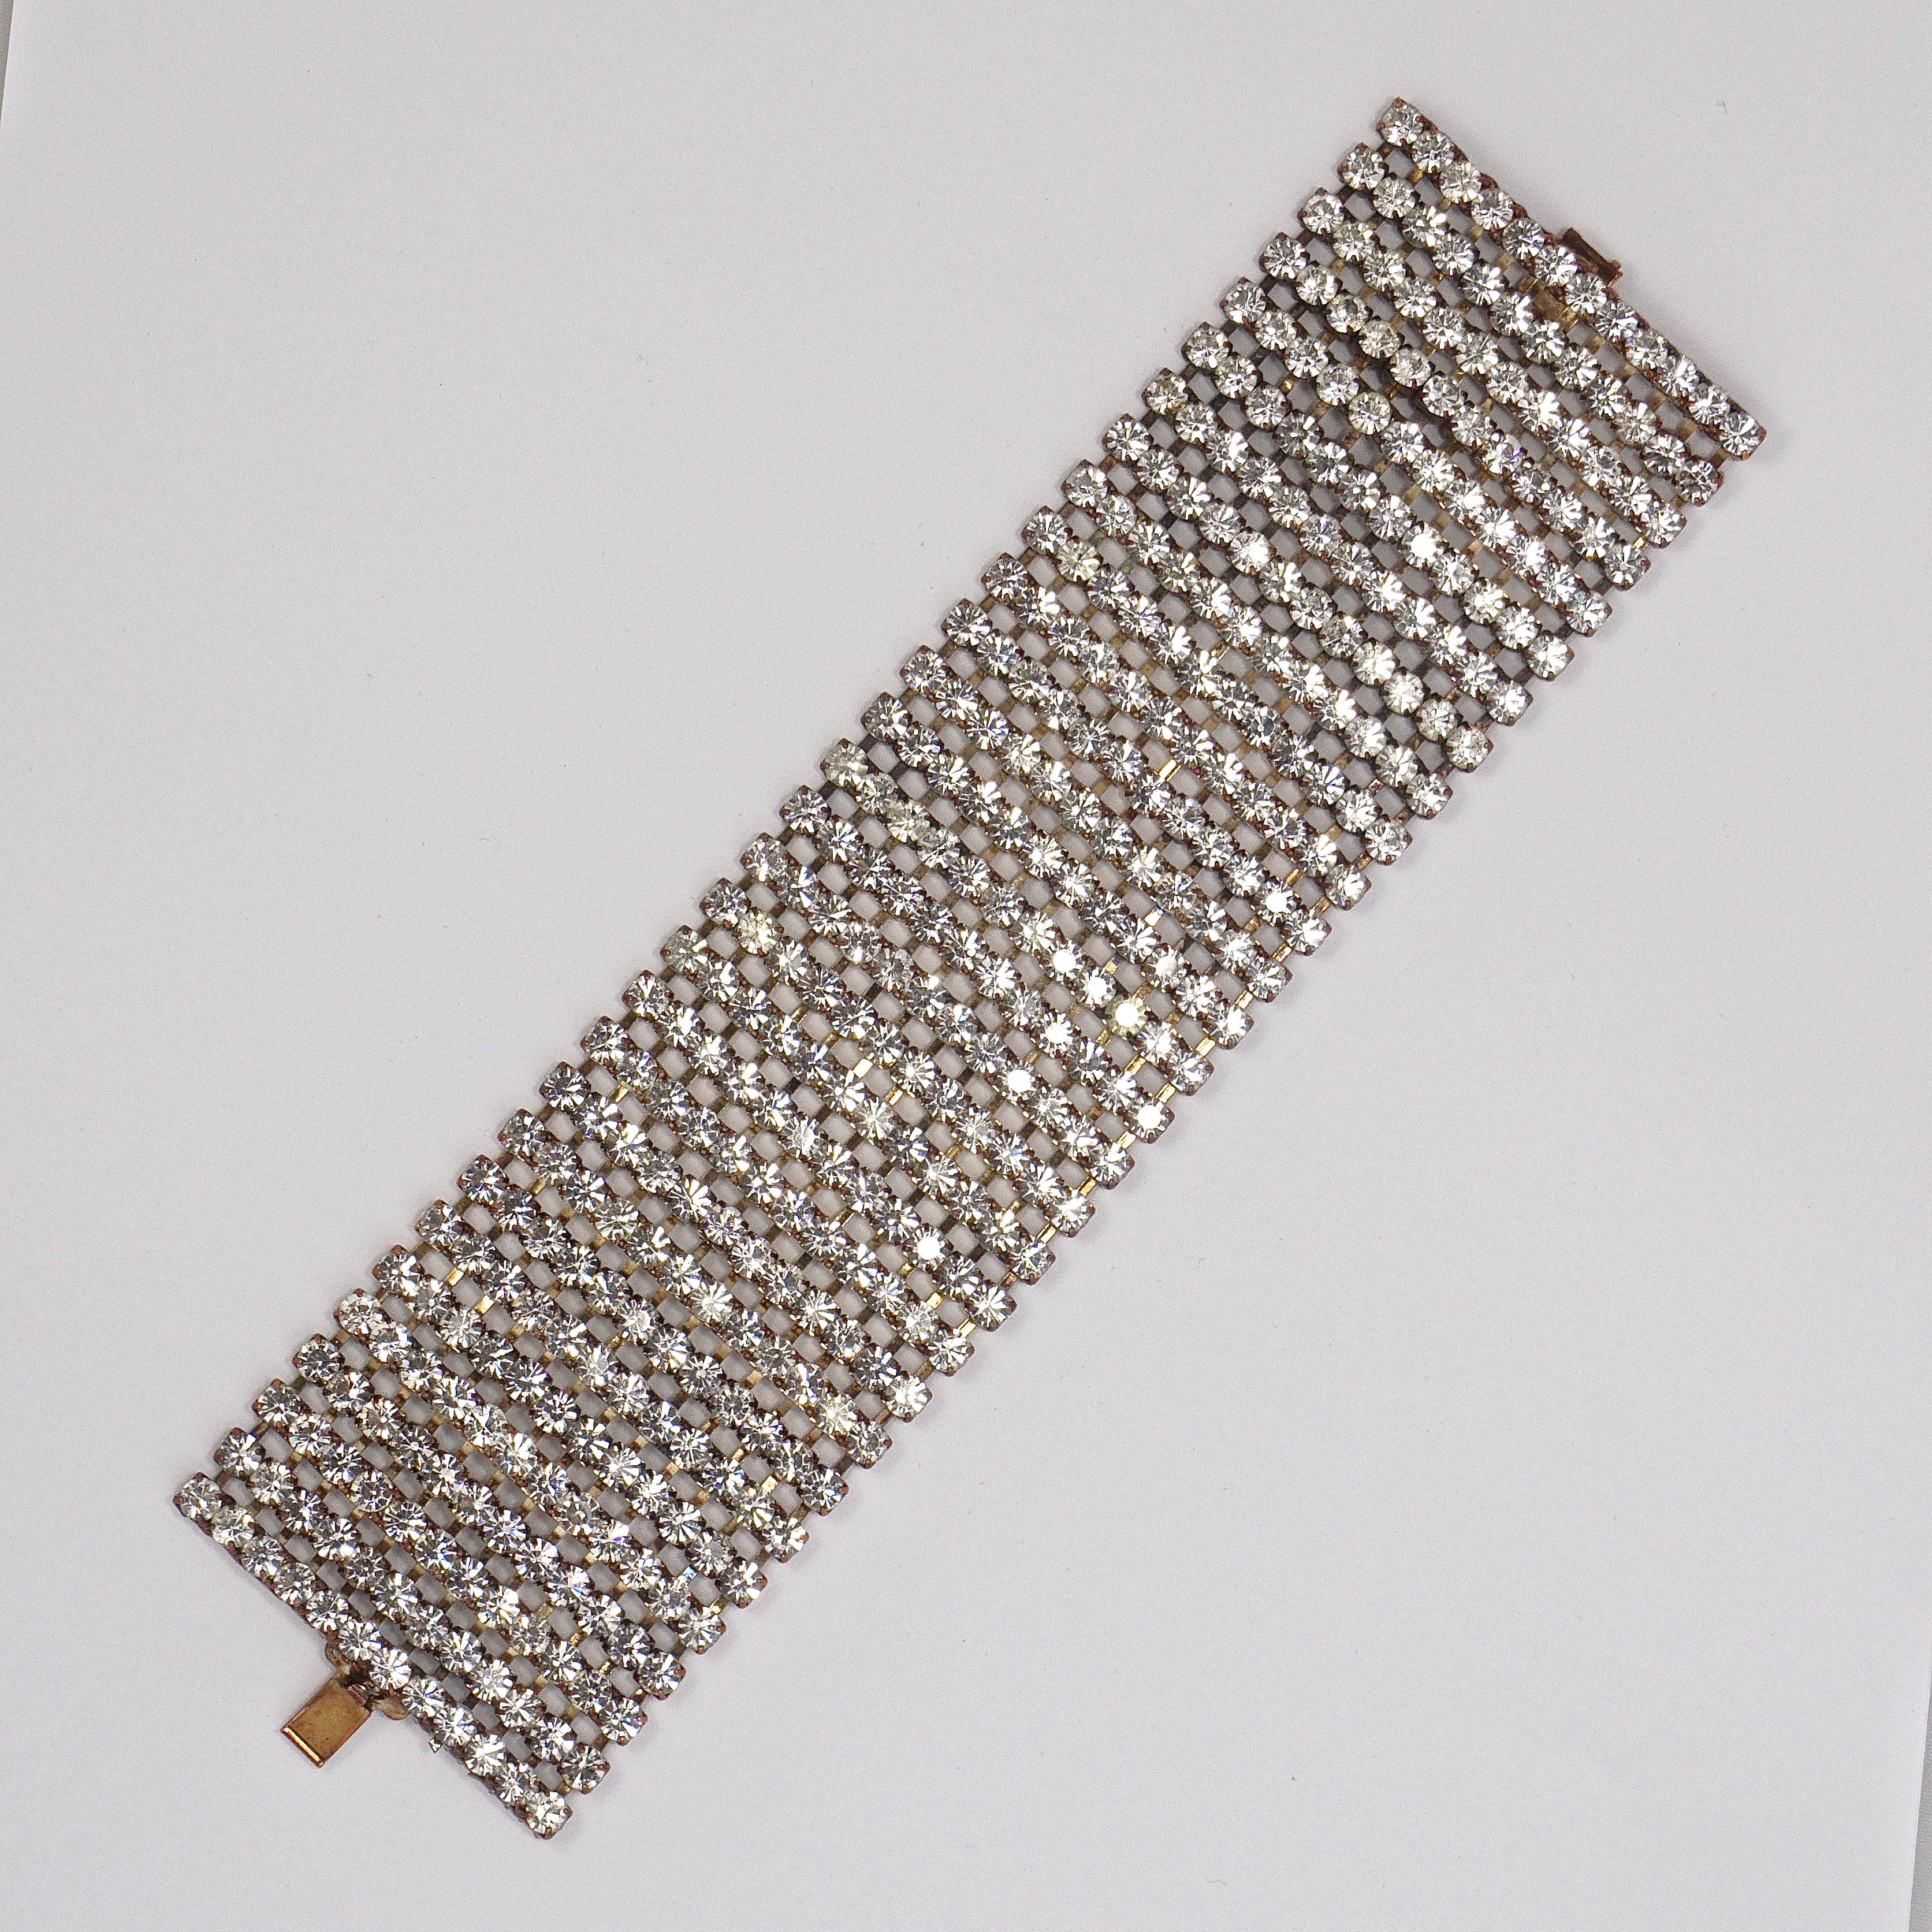 Wide copper tone bracelet, featuring twelve rows of sparkling clear faceted rhinestones. Measuring length 19.3cm / 7.6 inches by width is 5.08cm / 2 inches. Circa 1950s.

This is a beautiful and glamorous vintage statement bracelet for a special